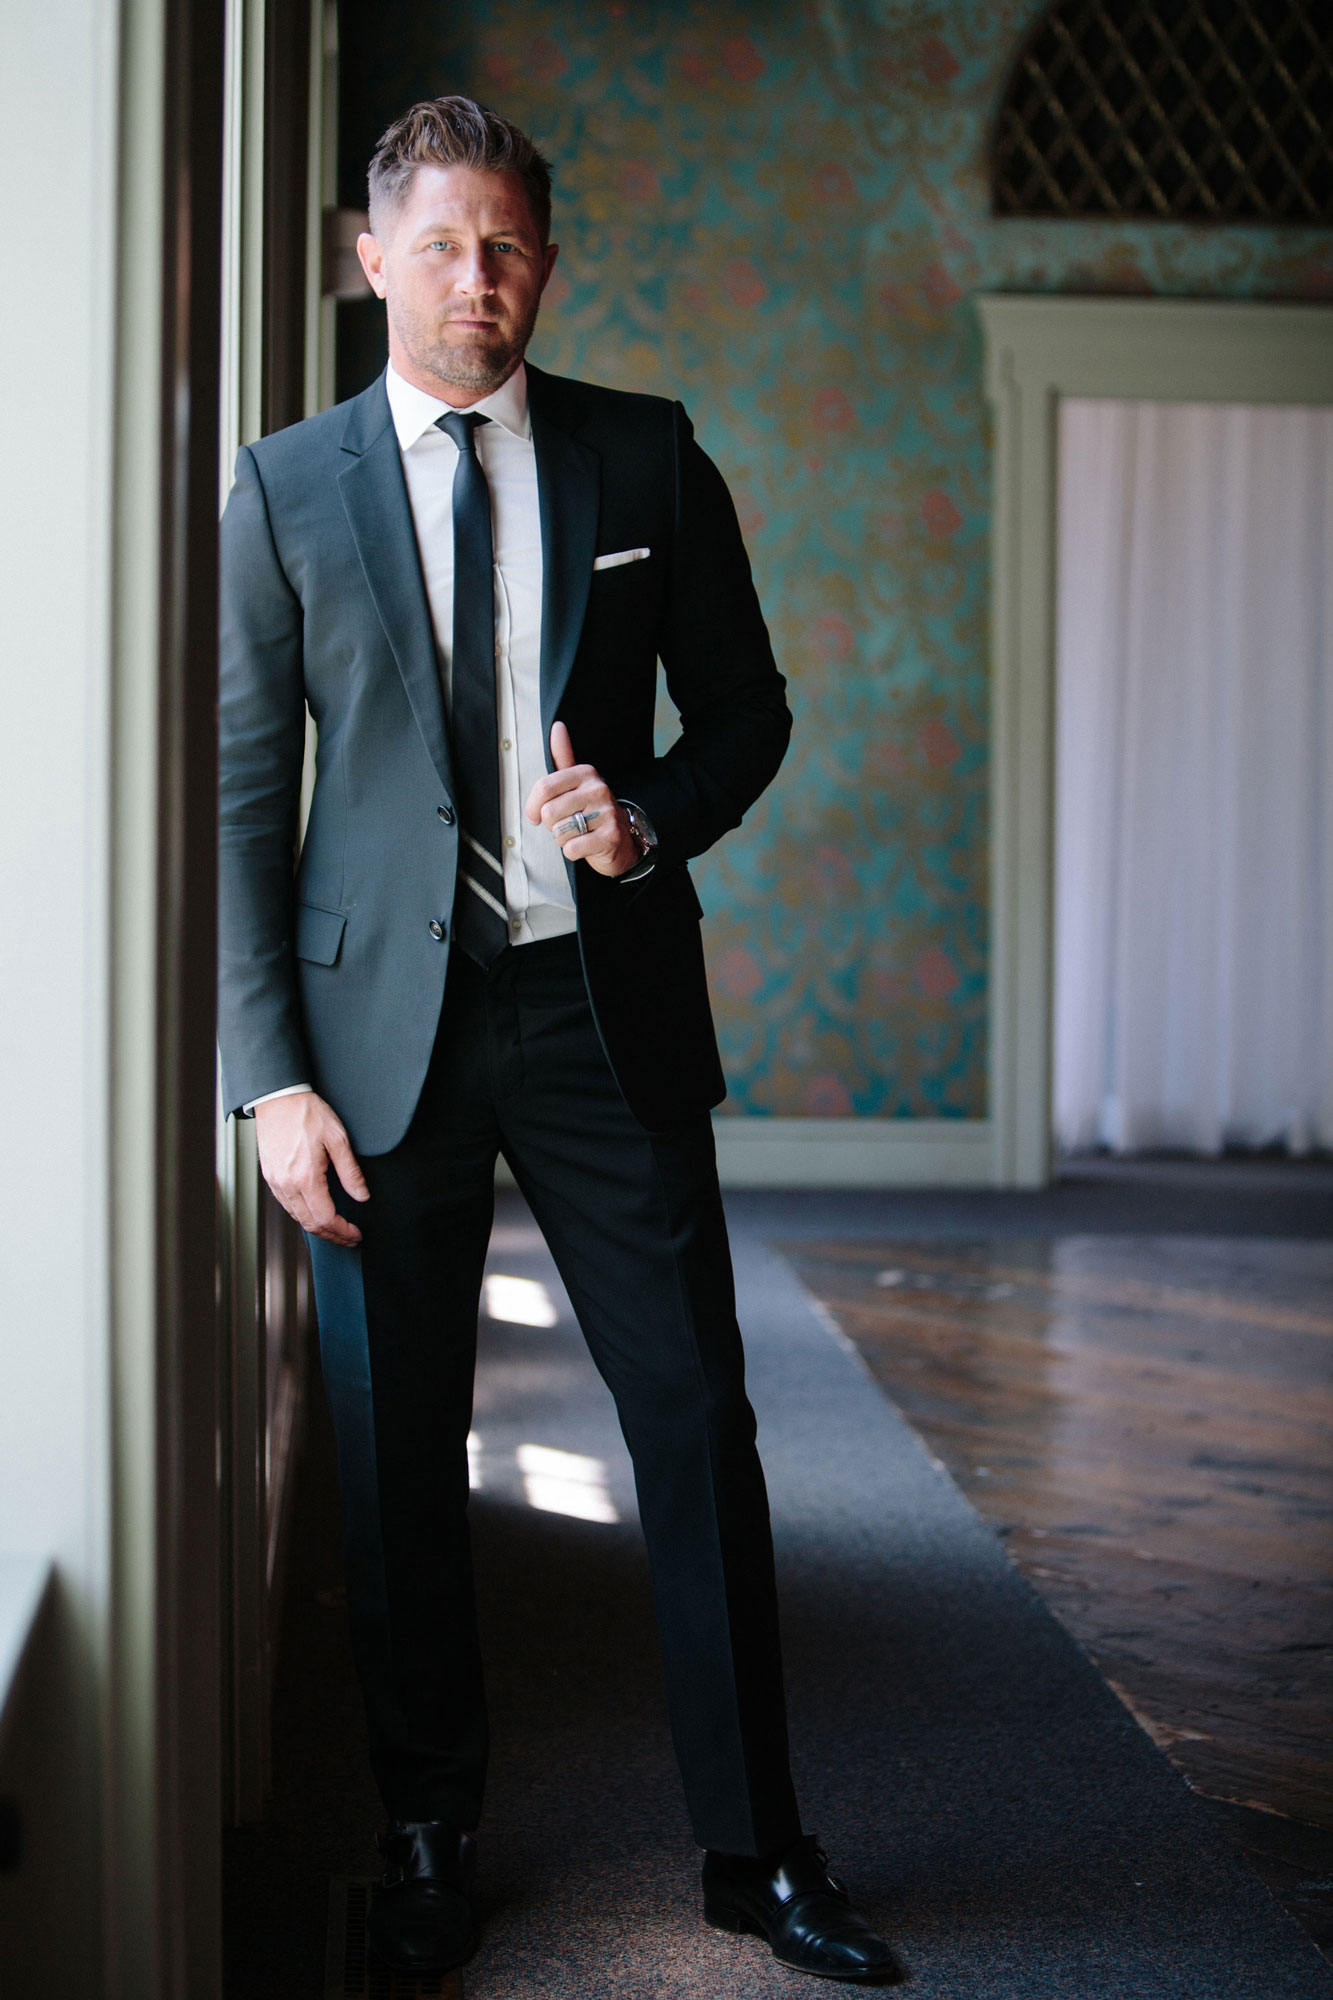 portrait of a groom on his wedding day